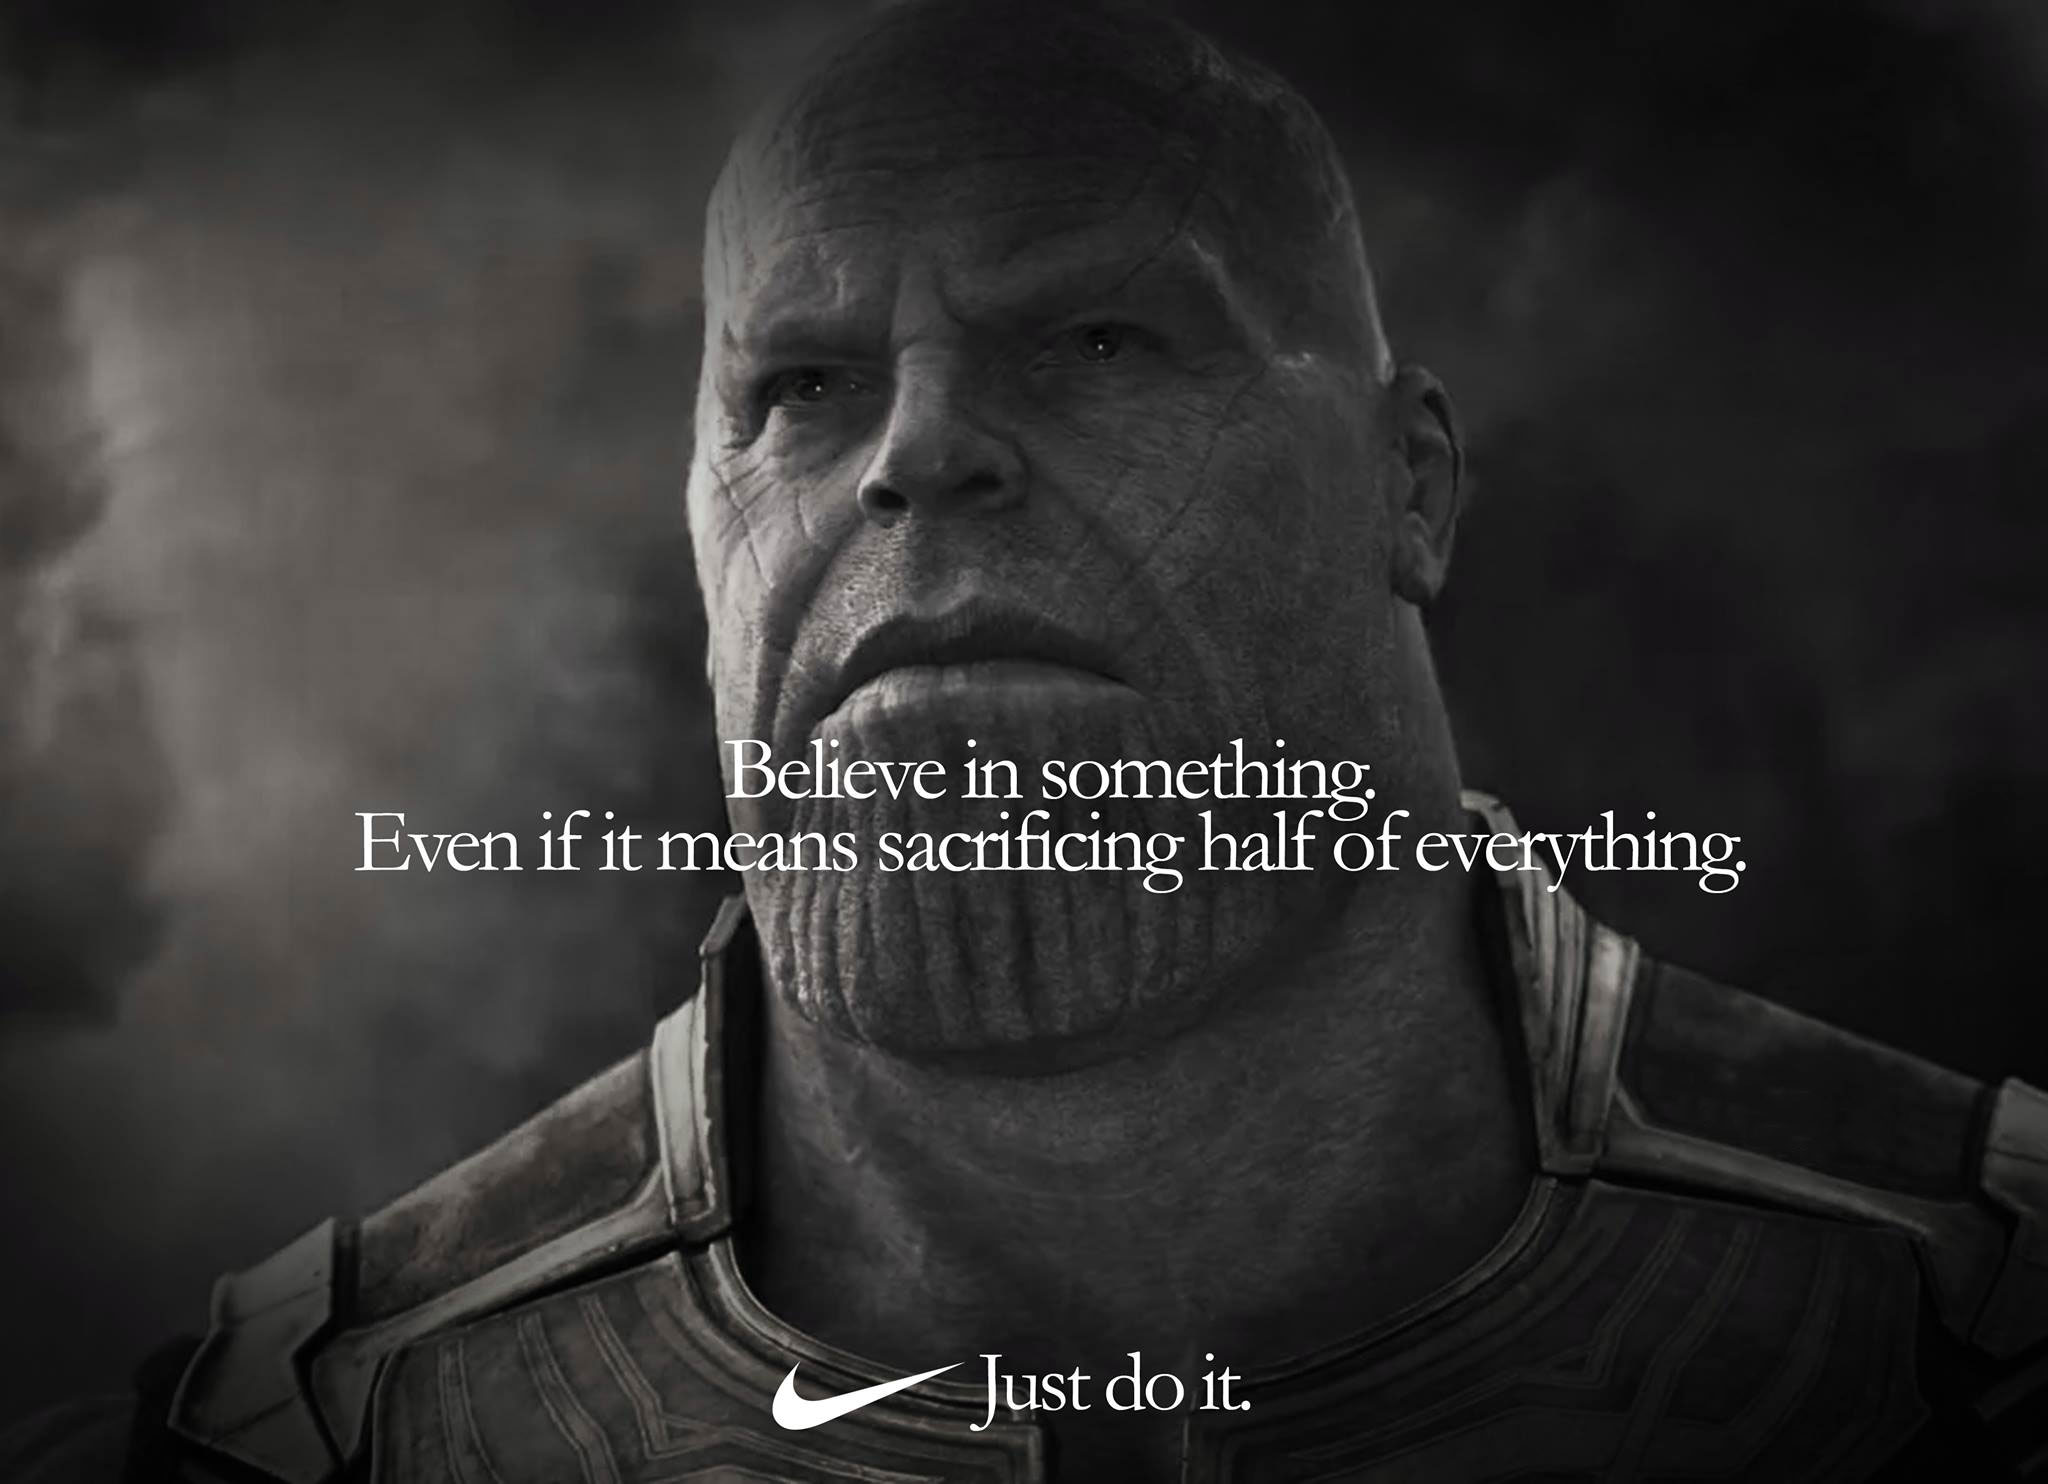 Nike Ad spoof of Thanos in black and white with the text 'believe in something. even if it means sacrificing half of everything.'